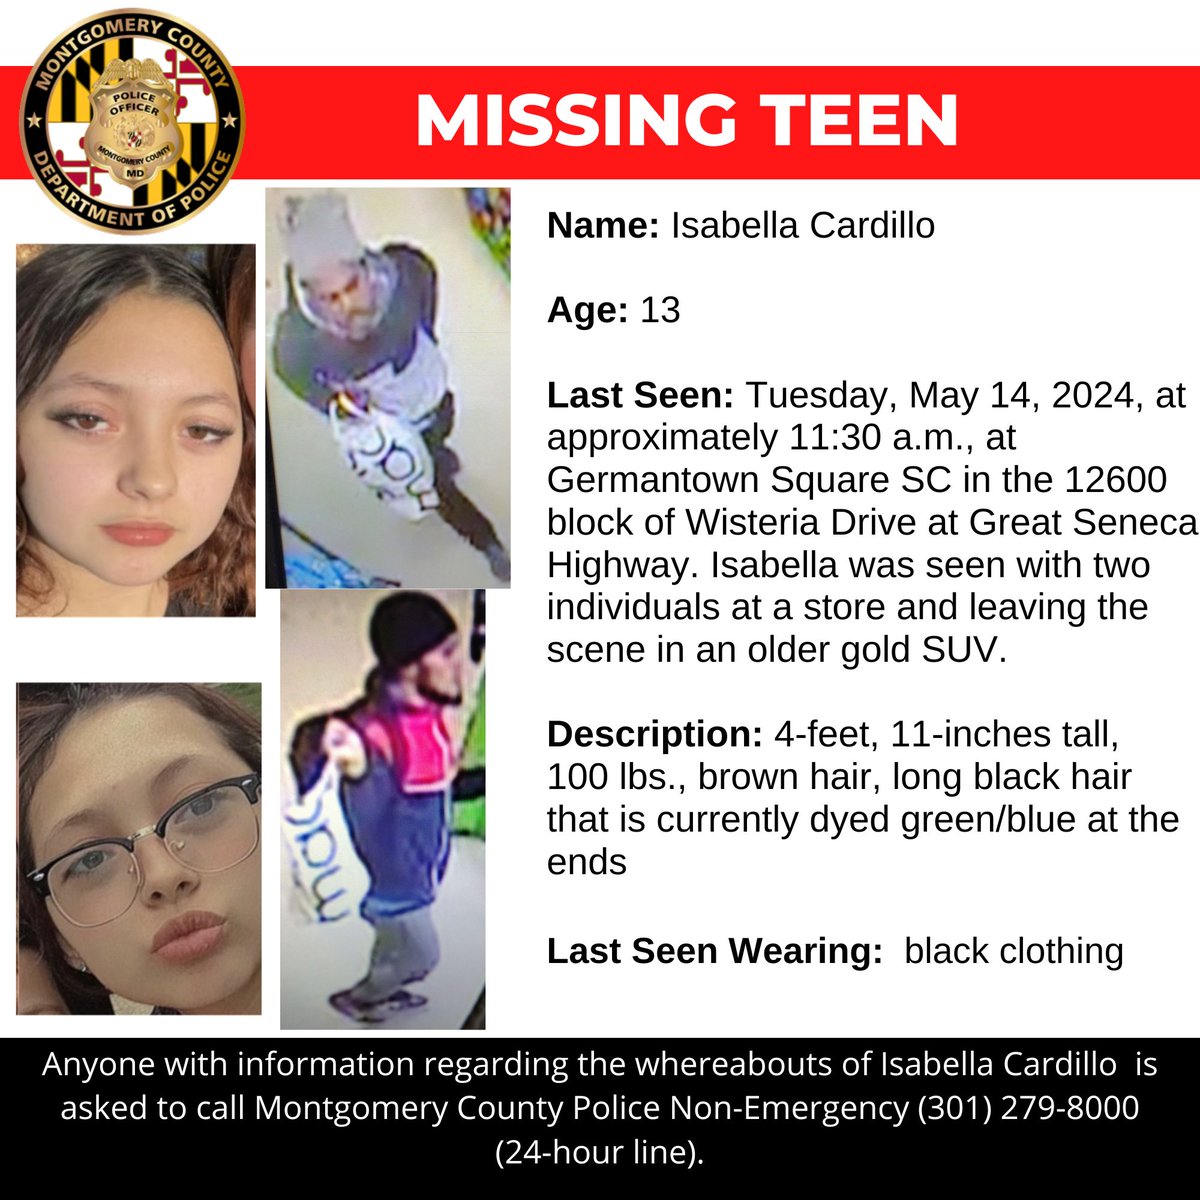 Concern for Missing Thirteen-Year-Old

www2.montgomerycountymd.gov/mcgportalapps/…

#mcpnews #missingperson